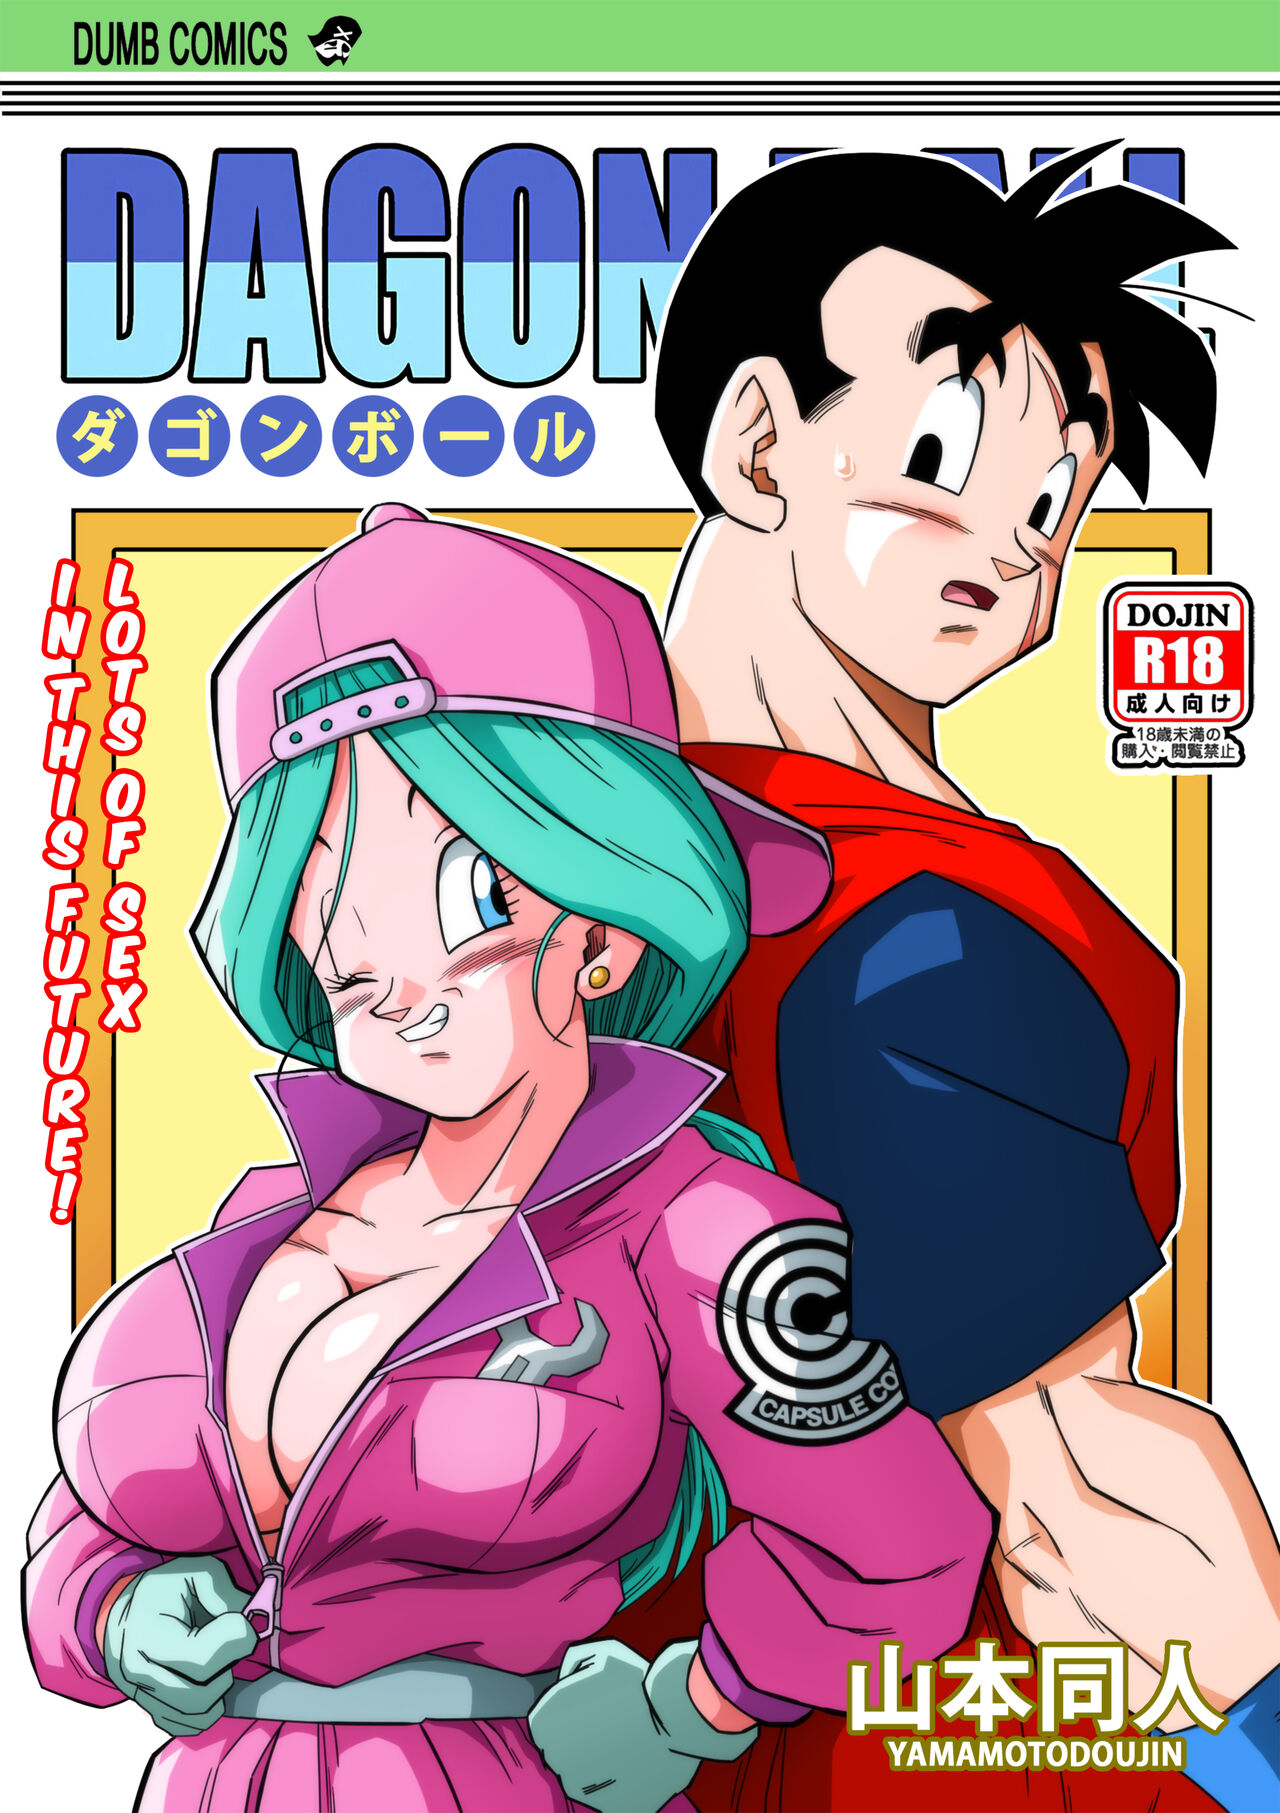 Sex Agg Com - Lost of sex in this Future! - BULMA and GOHAN (Dragon Ball Z) [Decensored]  - porn comics free download - comixxx.net